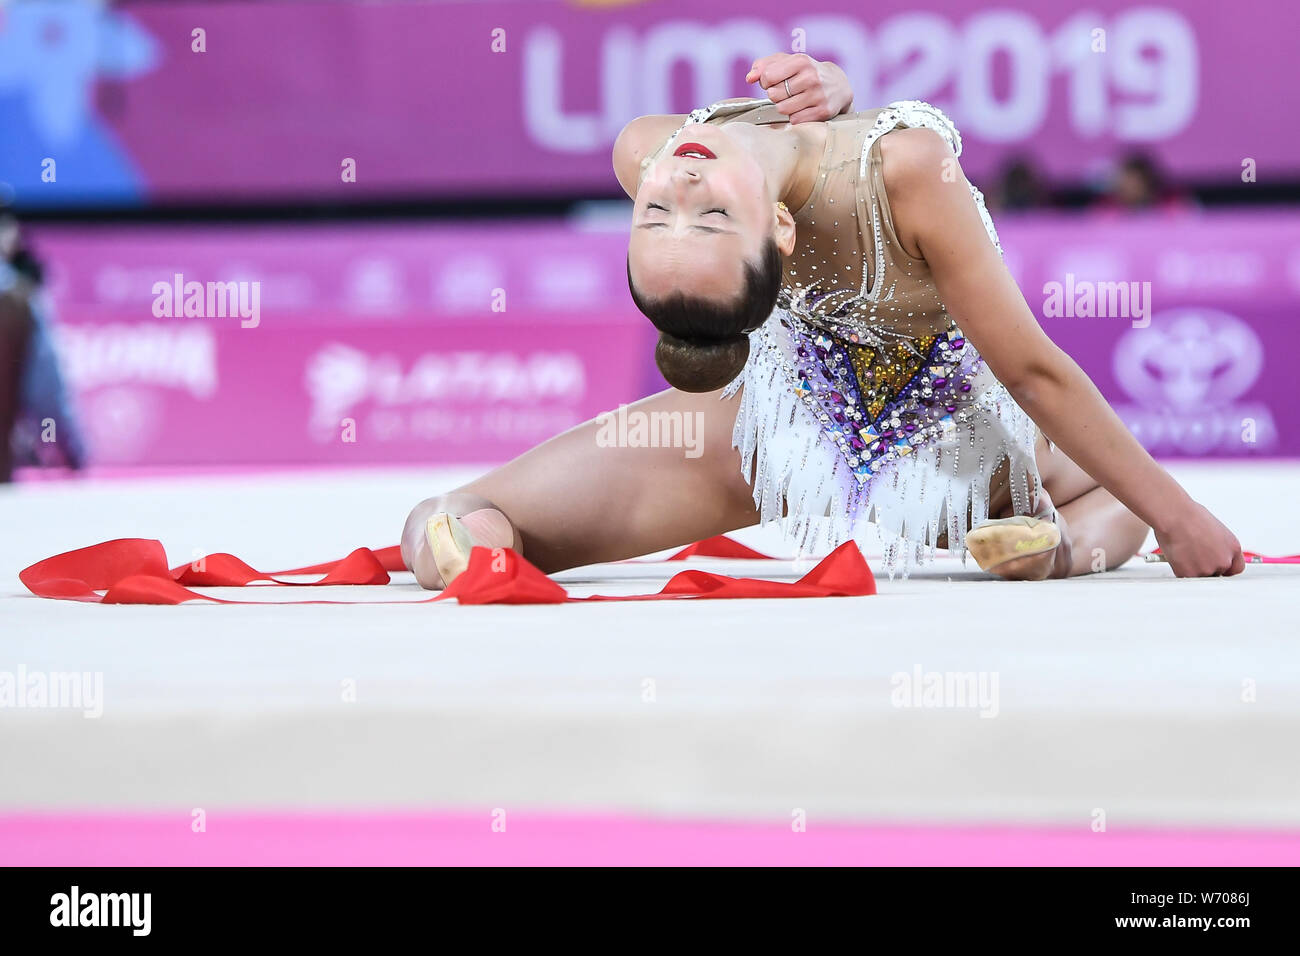 Lima, Peru. 3rd Aug, 2019. CAMILLA FEELEY from the US competes in the individual All-Around with the ribbon during the competition held in the Polideportivo Villa El Salvador in Lima, Peru. Credit: Amy Sanderson/ZUMA Wire/Alamy Live News Stock Photo